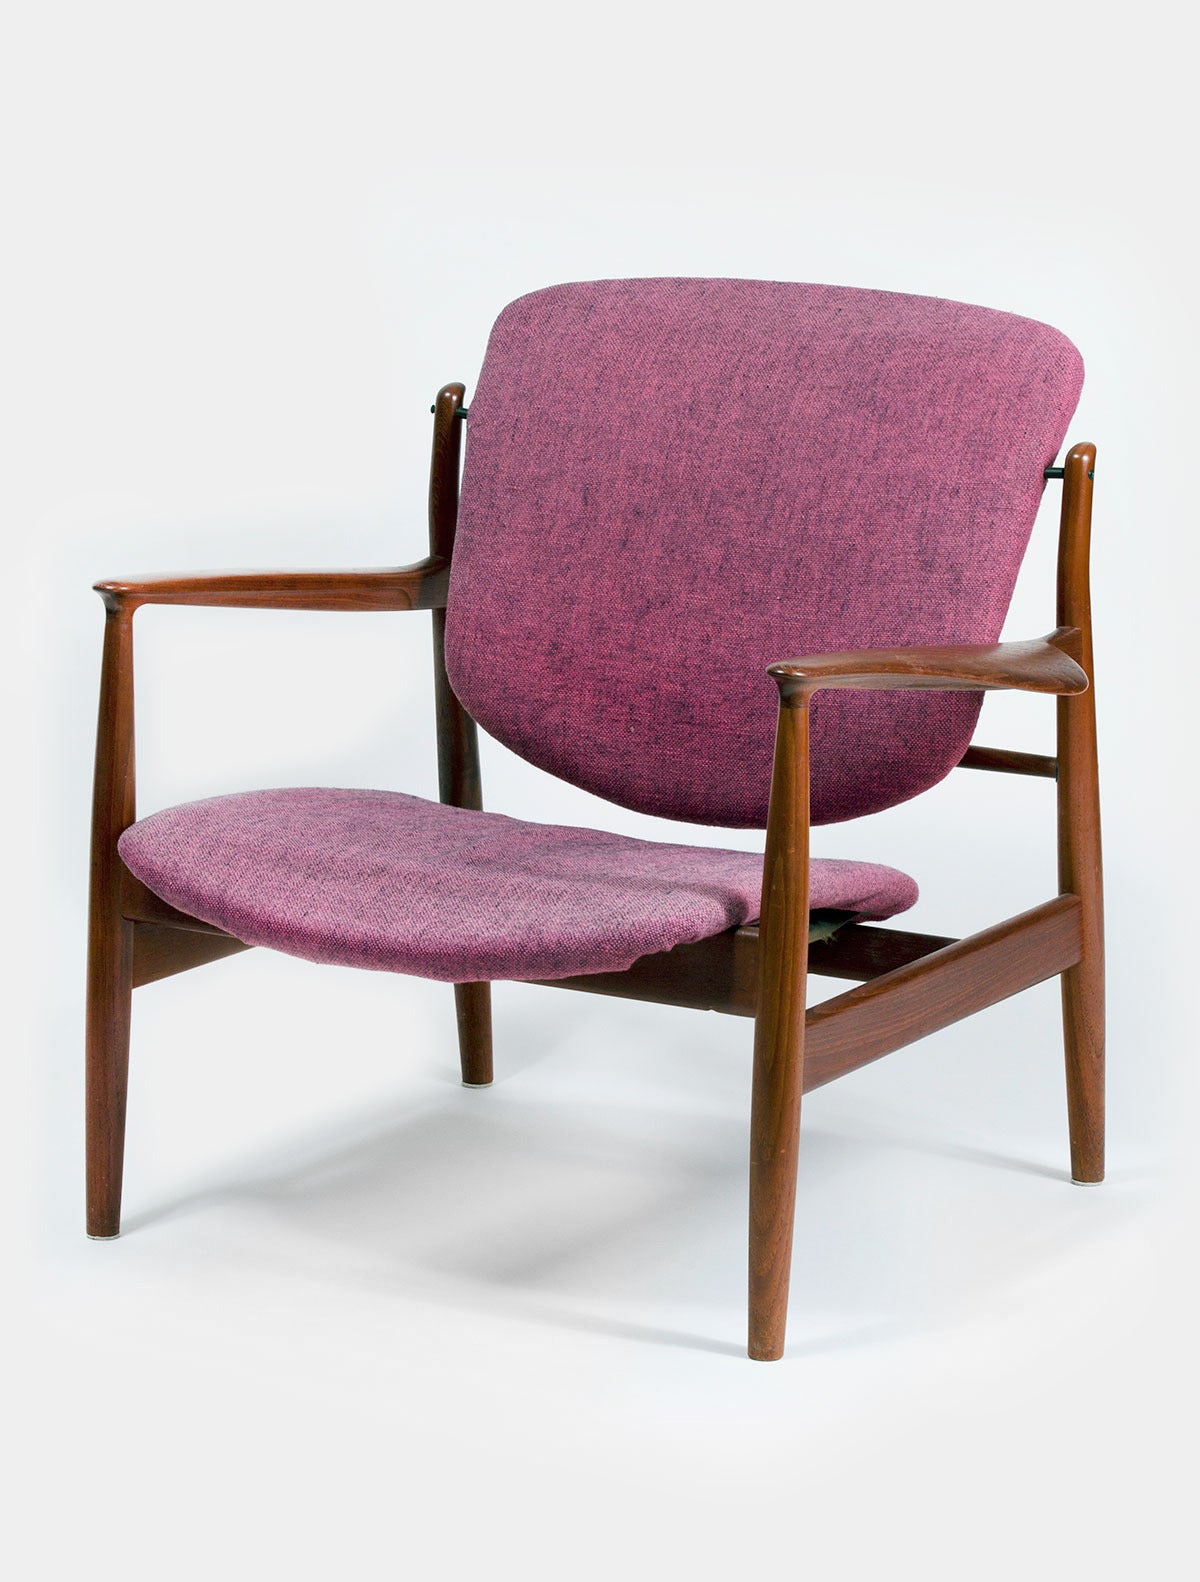 Carved teak and fabric armchair Model 136 by Scandinavian Finn Juhl. Retains its original mauve wool fabric, but does need new foam and possibly strapping. The chair is in otherwise exceptional all original condition. Signed with a metal tag 